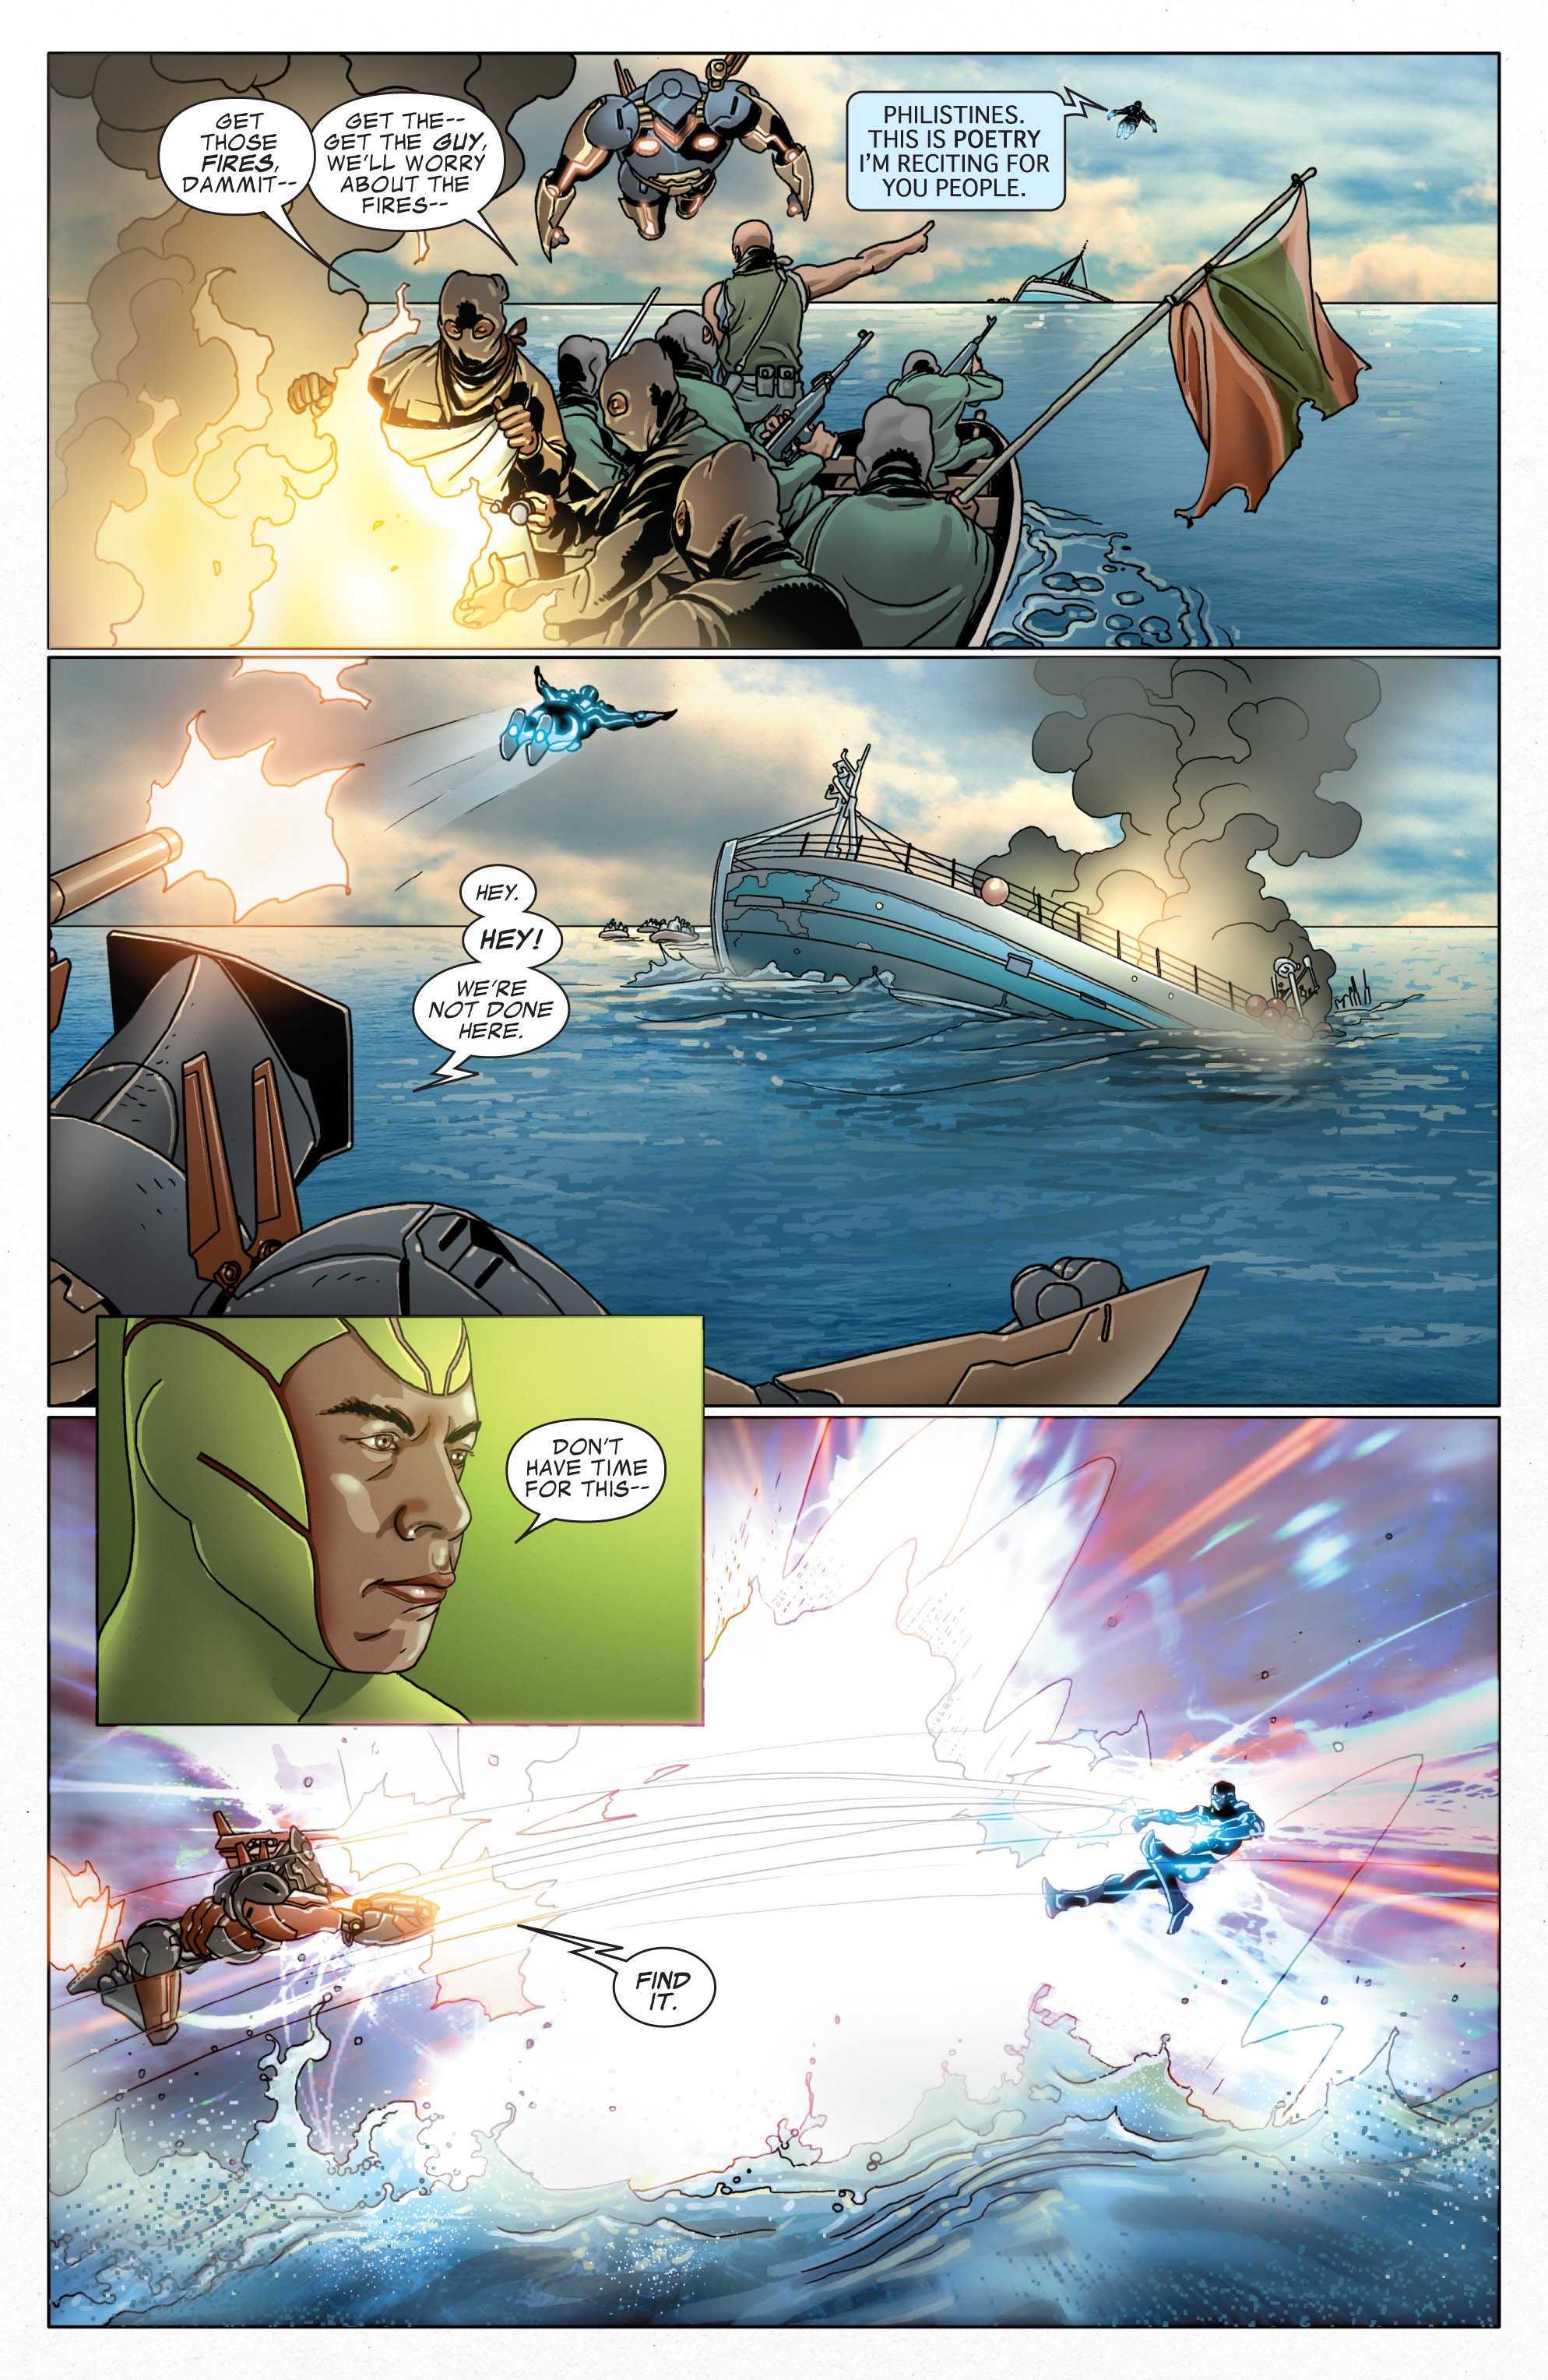 Invincible Iron Man (2008) 518 Page 4